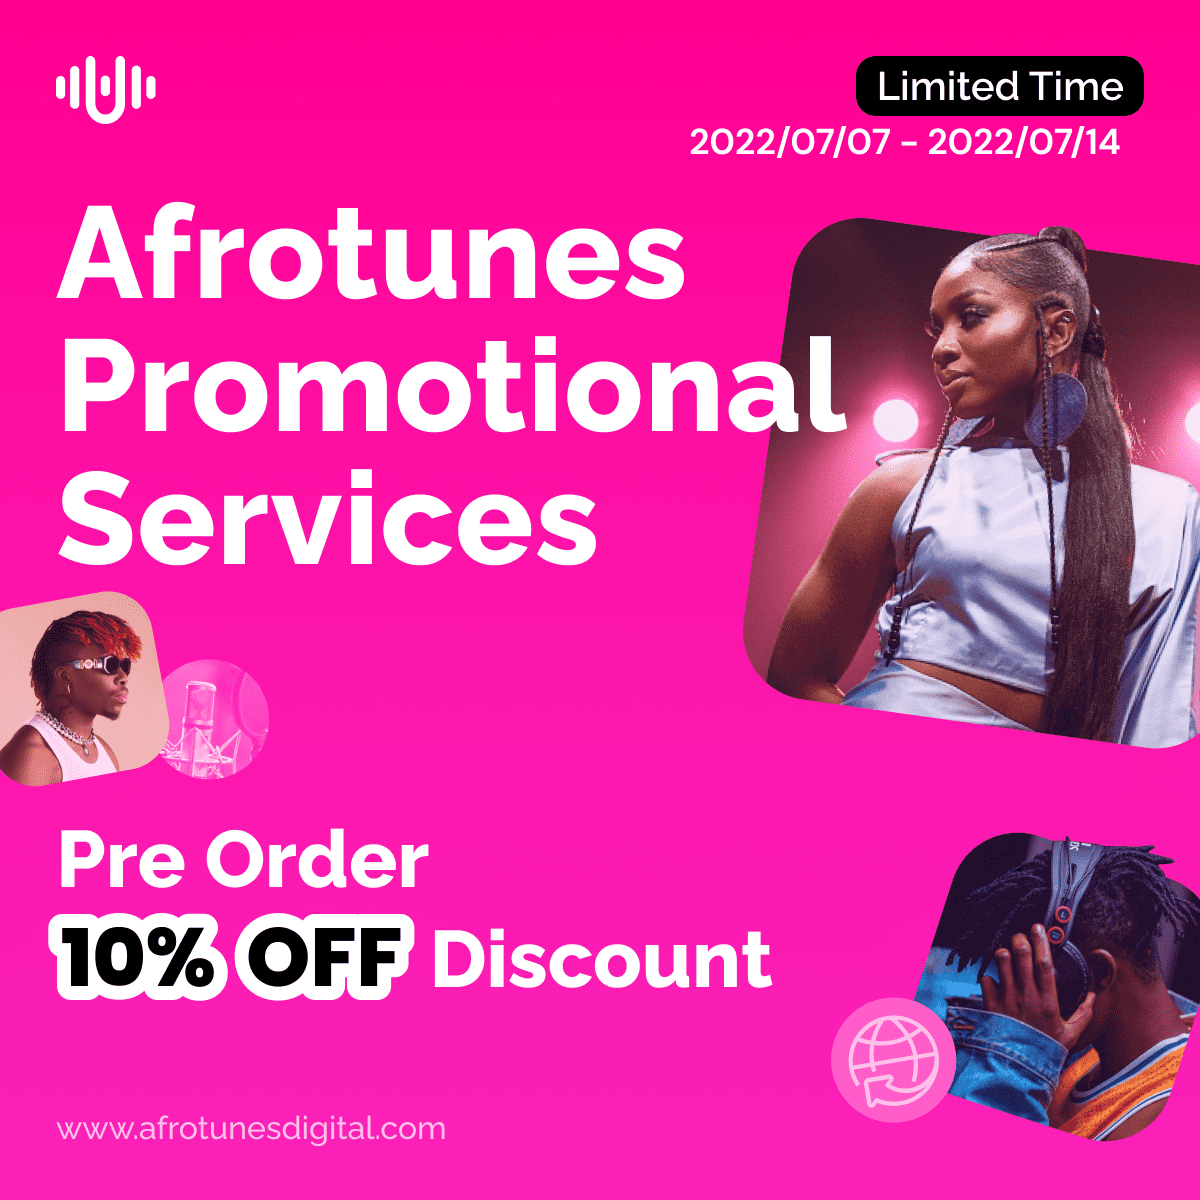 Pre-order Afrotunes Promotional Services Now With 10% Off Discount